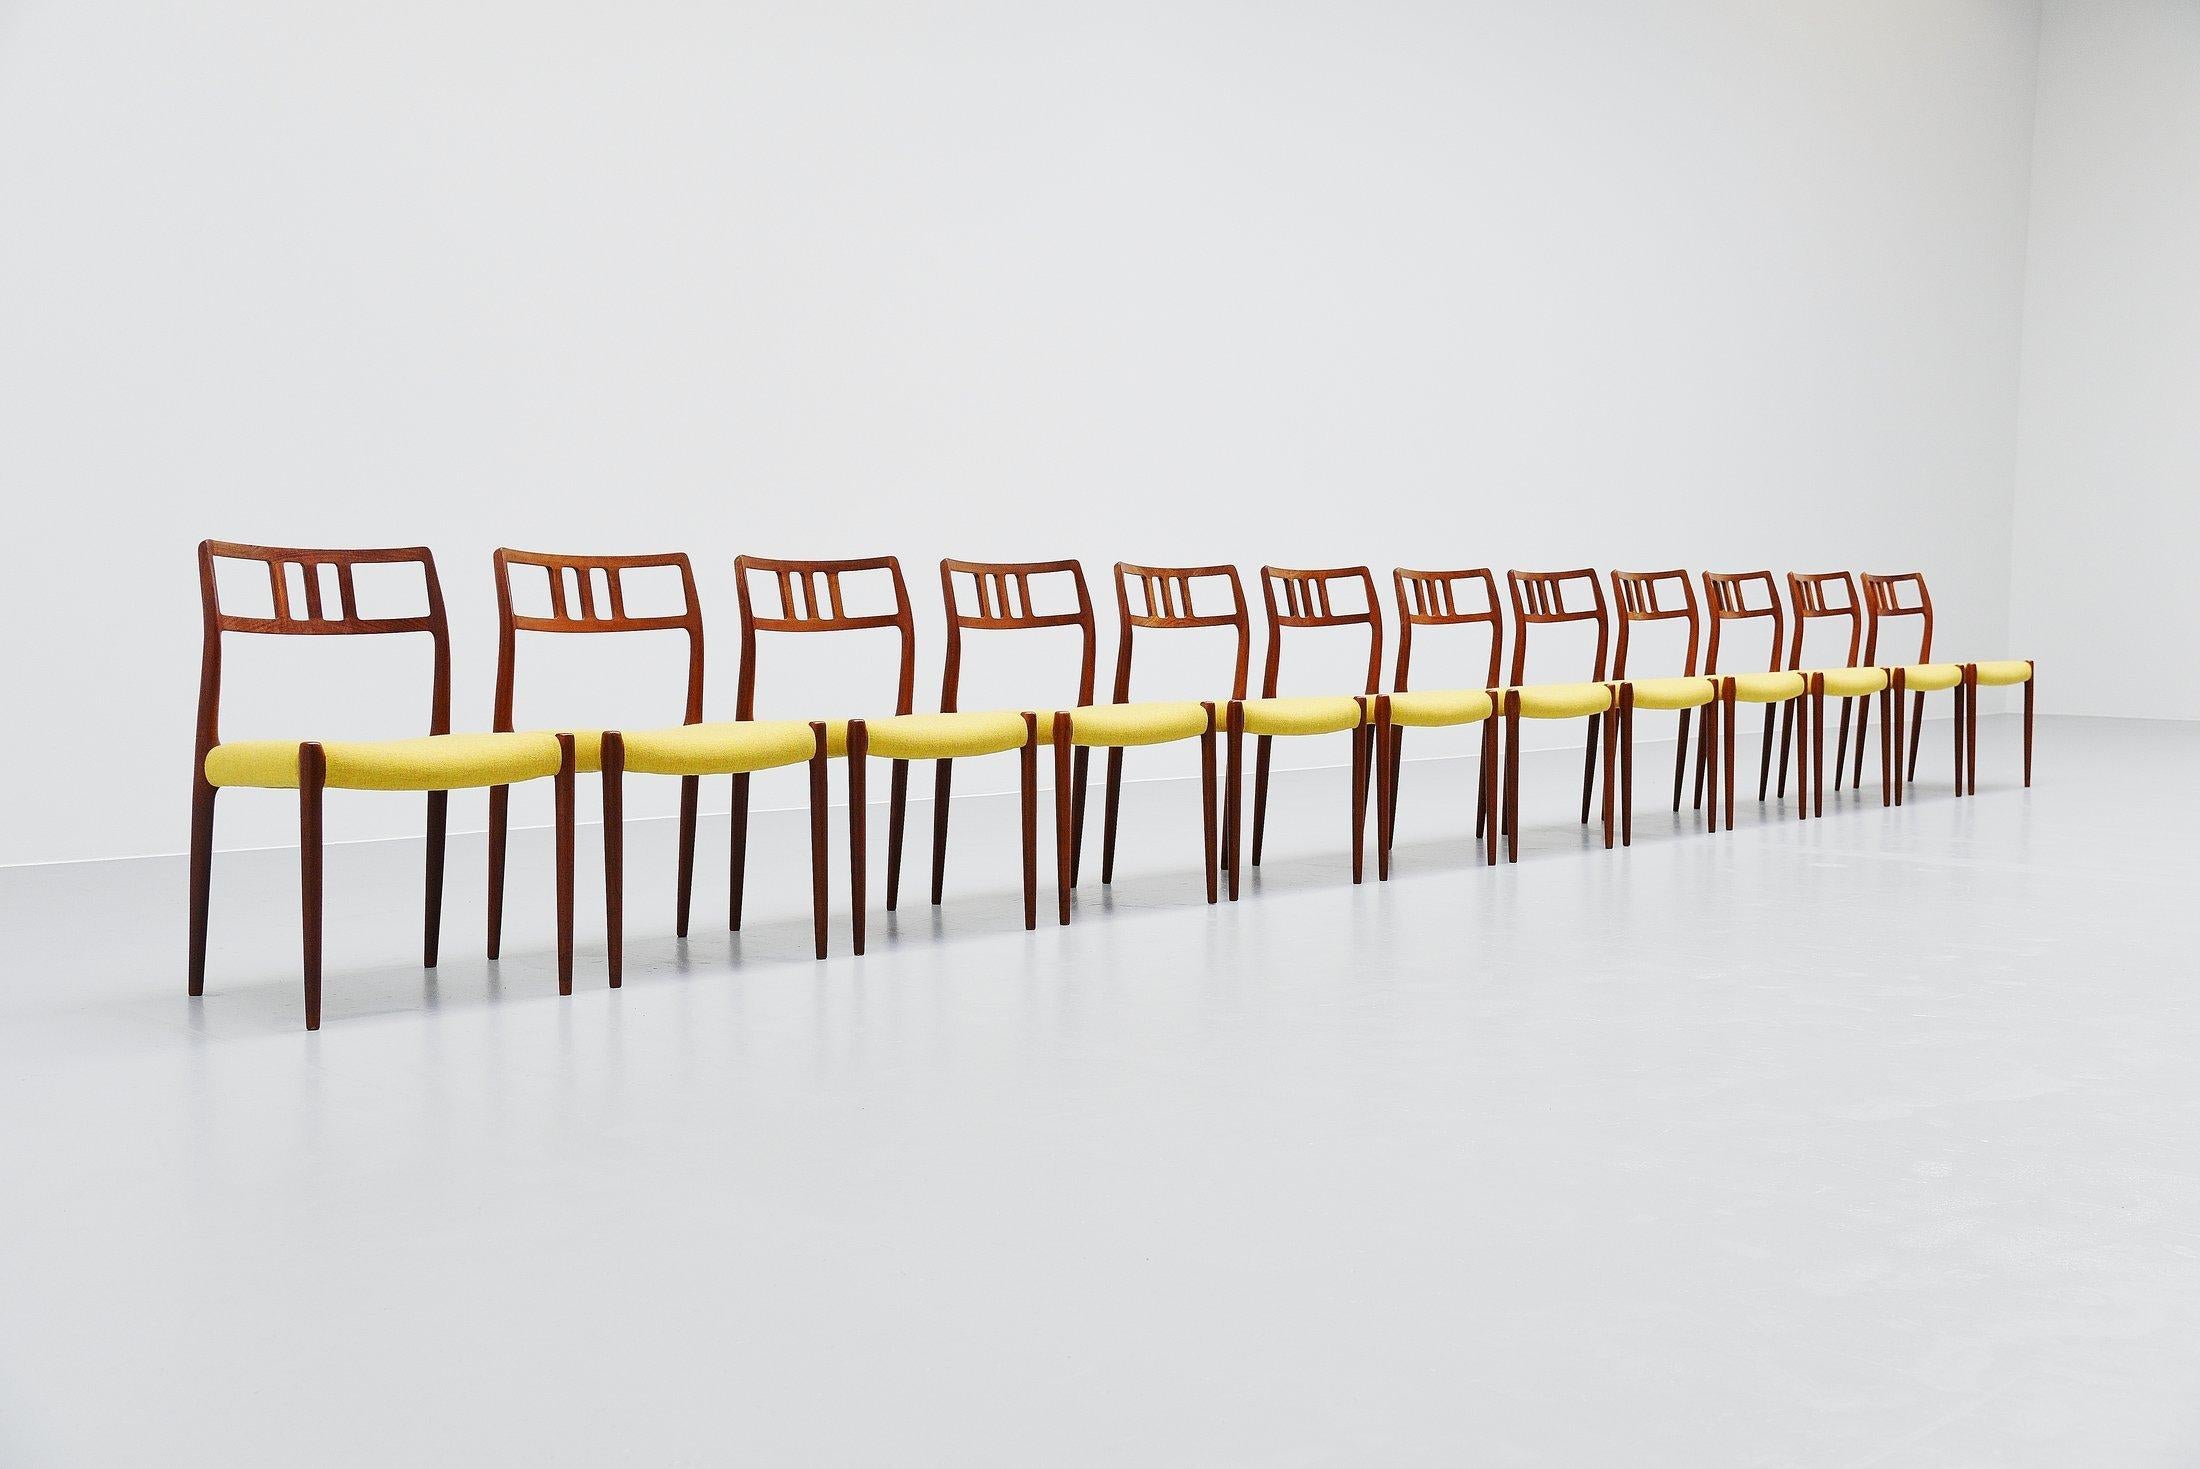 Large set of dining chairs model 79 designed by Niels Møller and manufactured by J.L. Møller Møbelfabrik, Denmark, 1966. This is for a large set of 17 chairs with solid teak frames and they are newly upholstered in yellow 'Flora' fabric by Kvadrat.